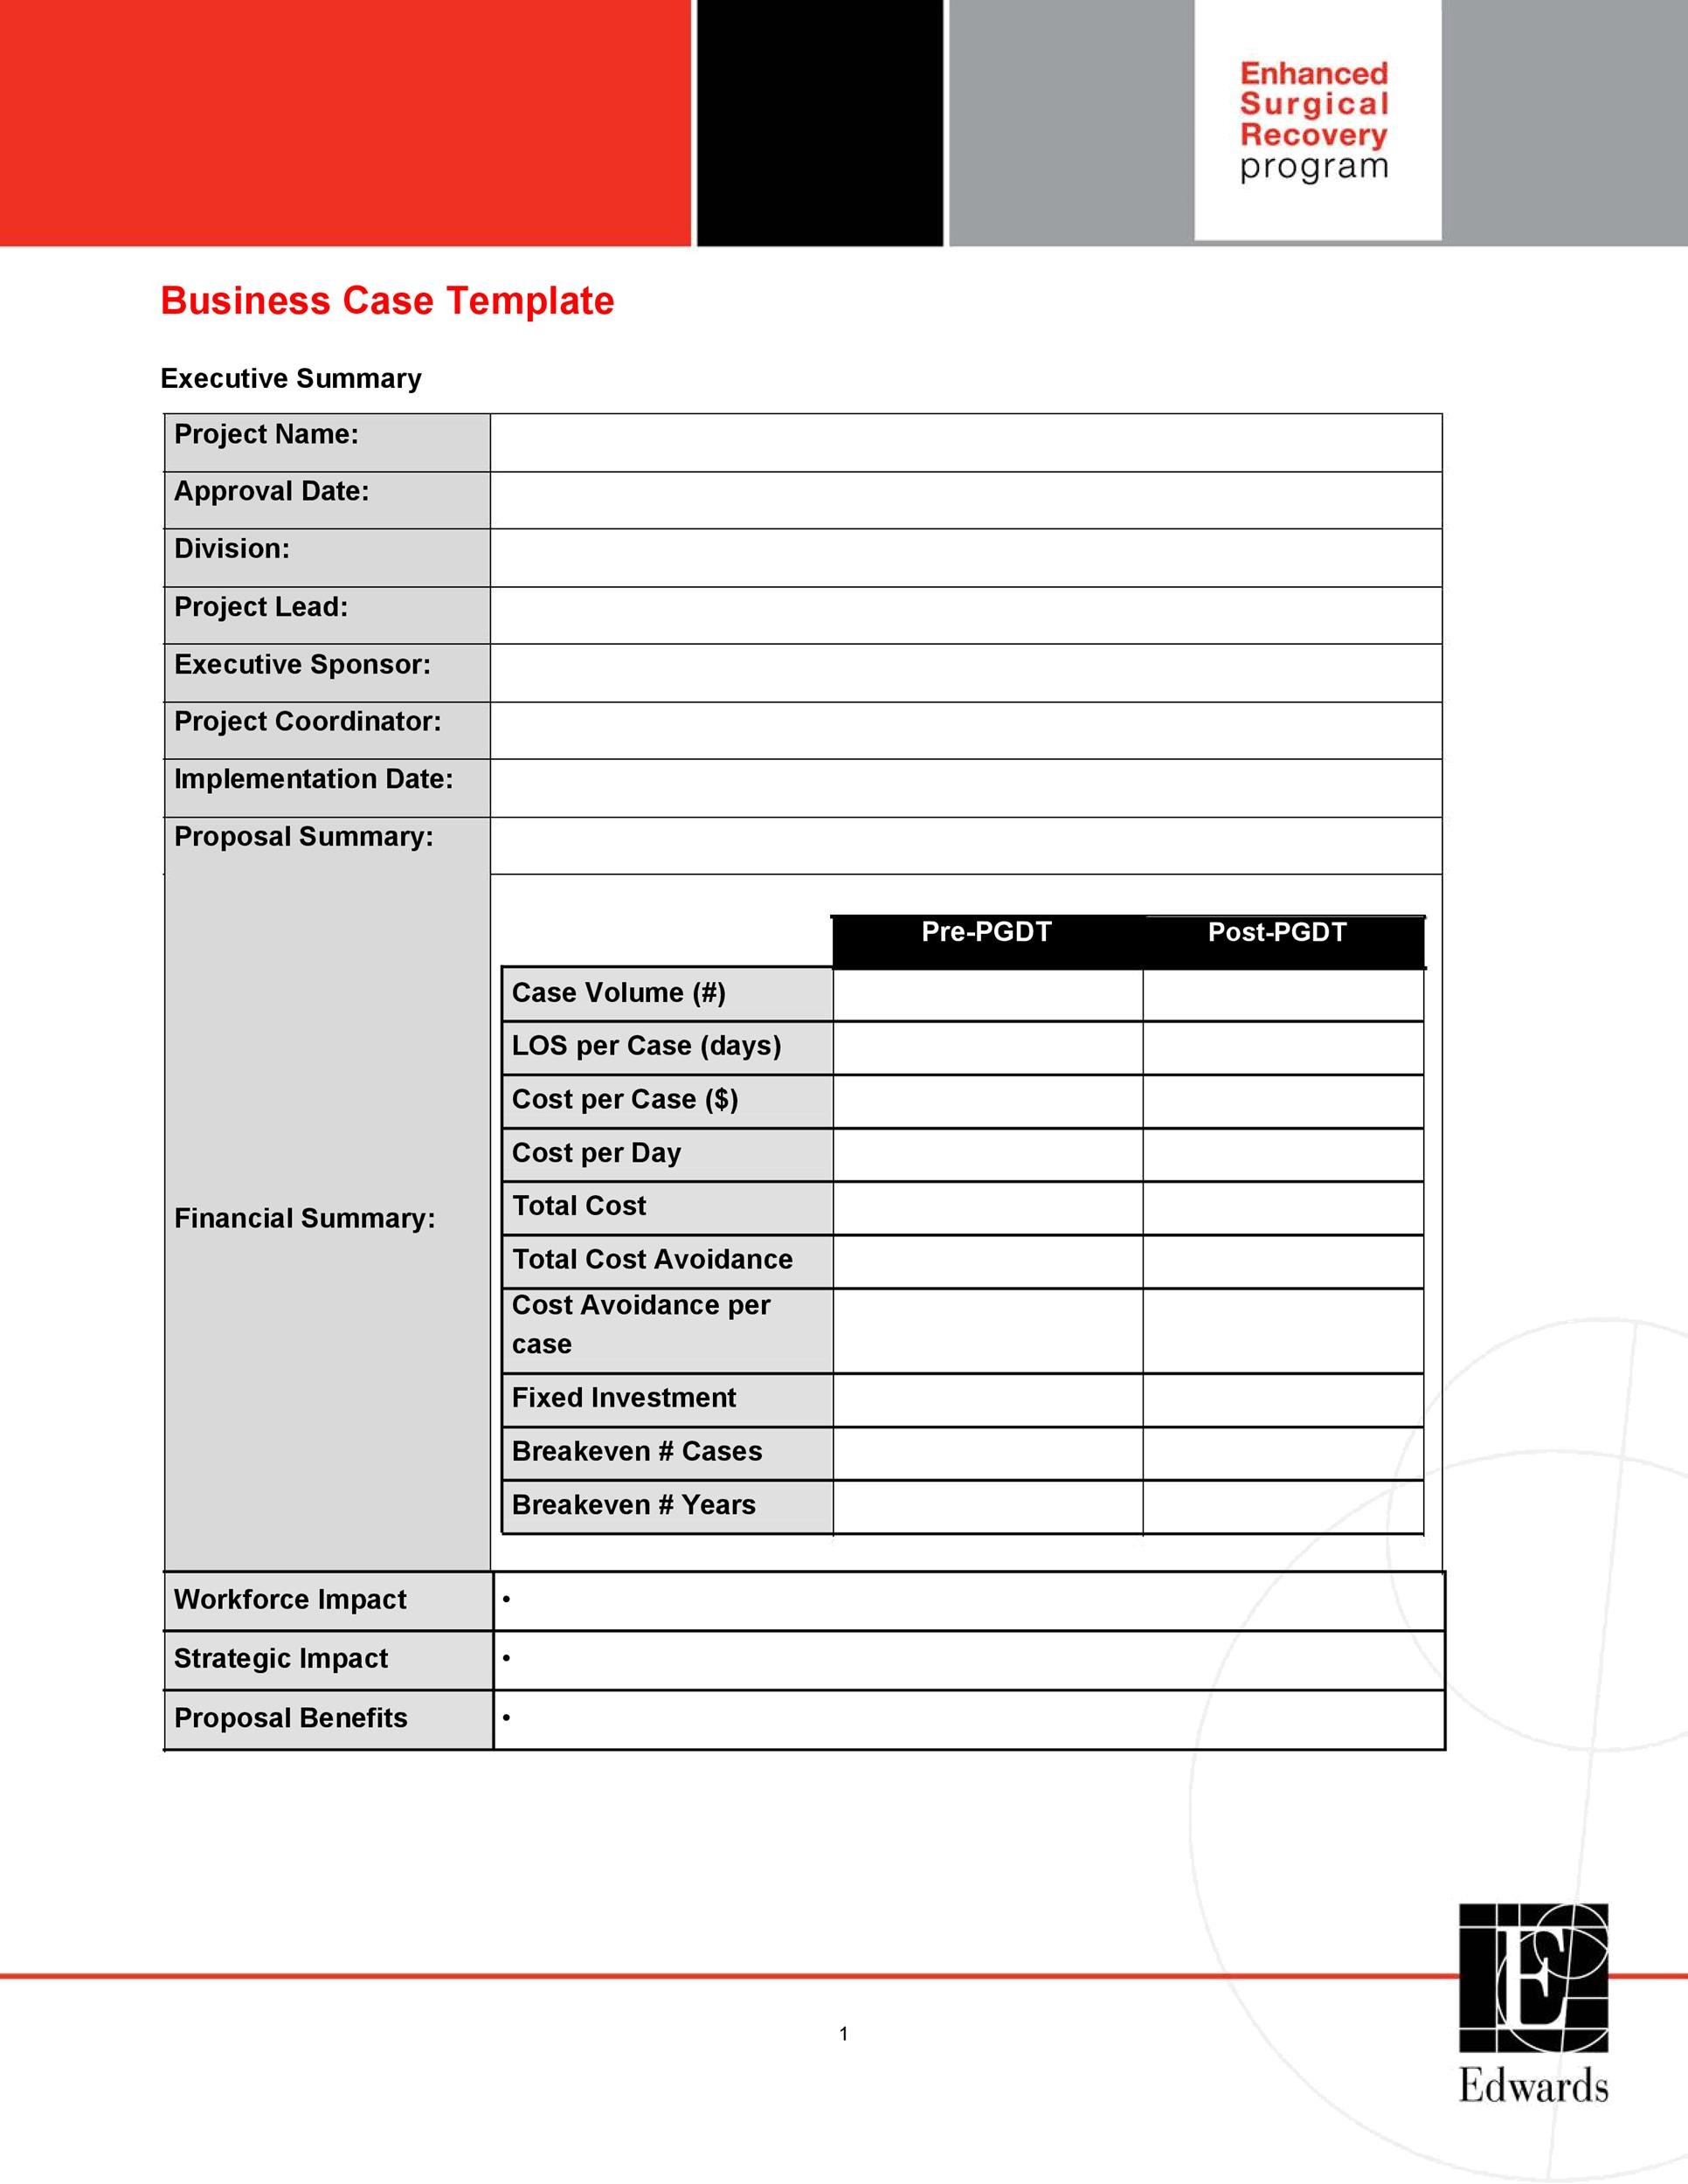 30+ Simple Business Case Templates & Examples ᐅ TemplateLab